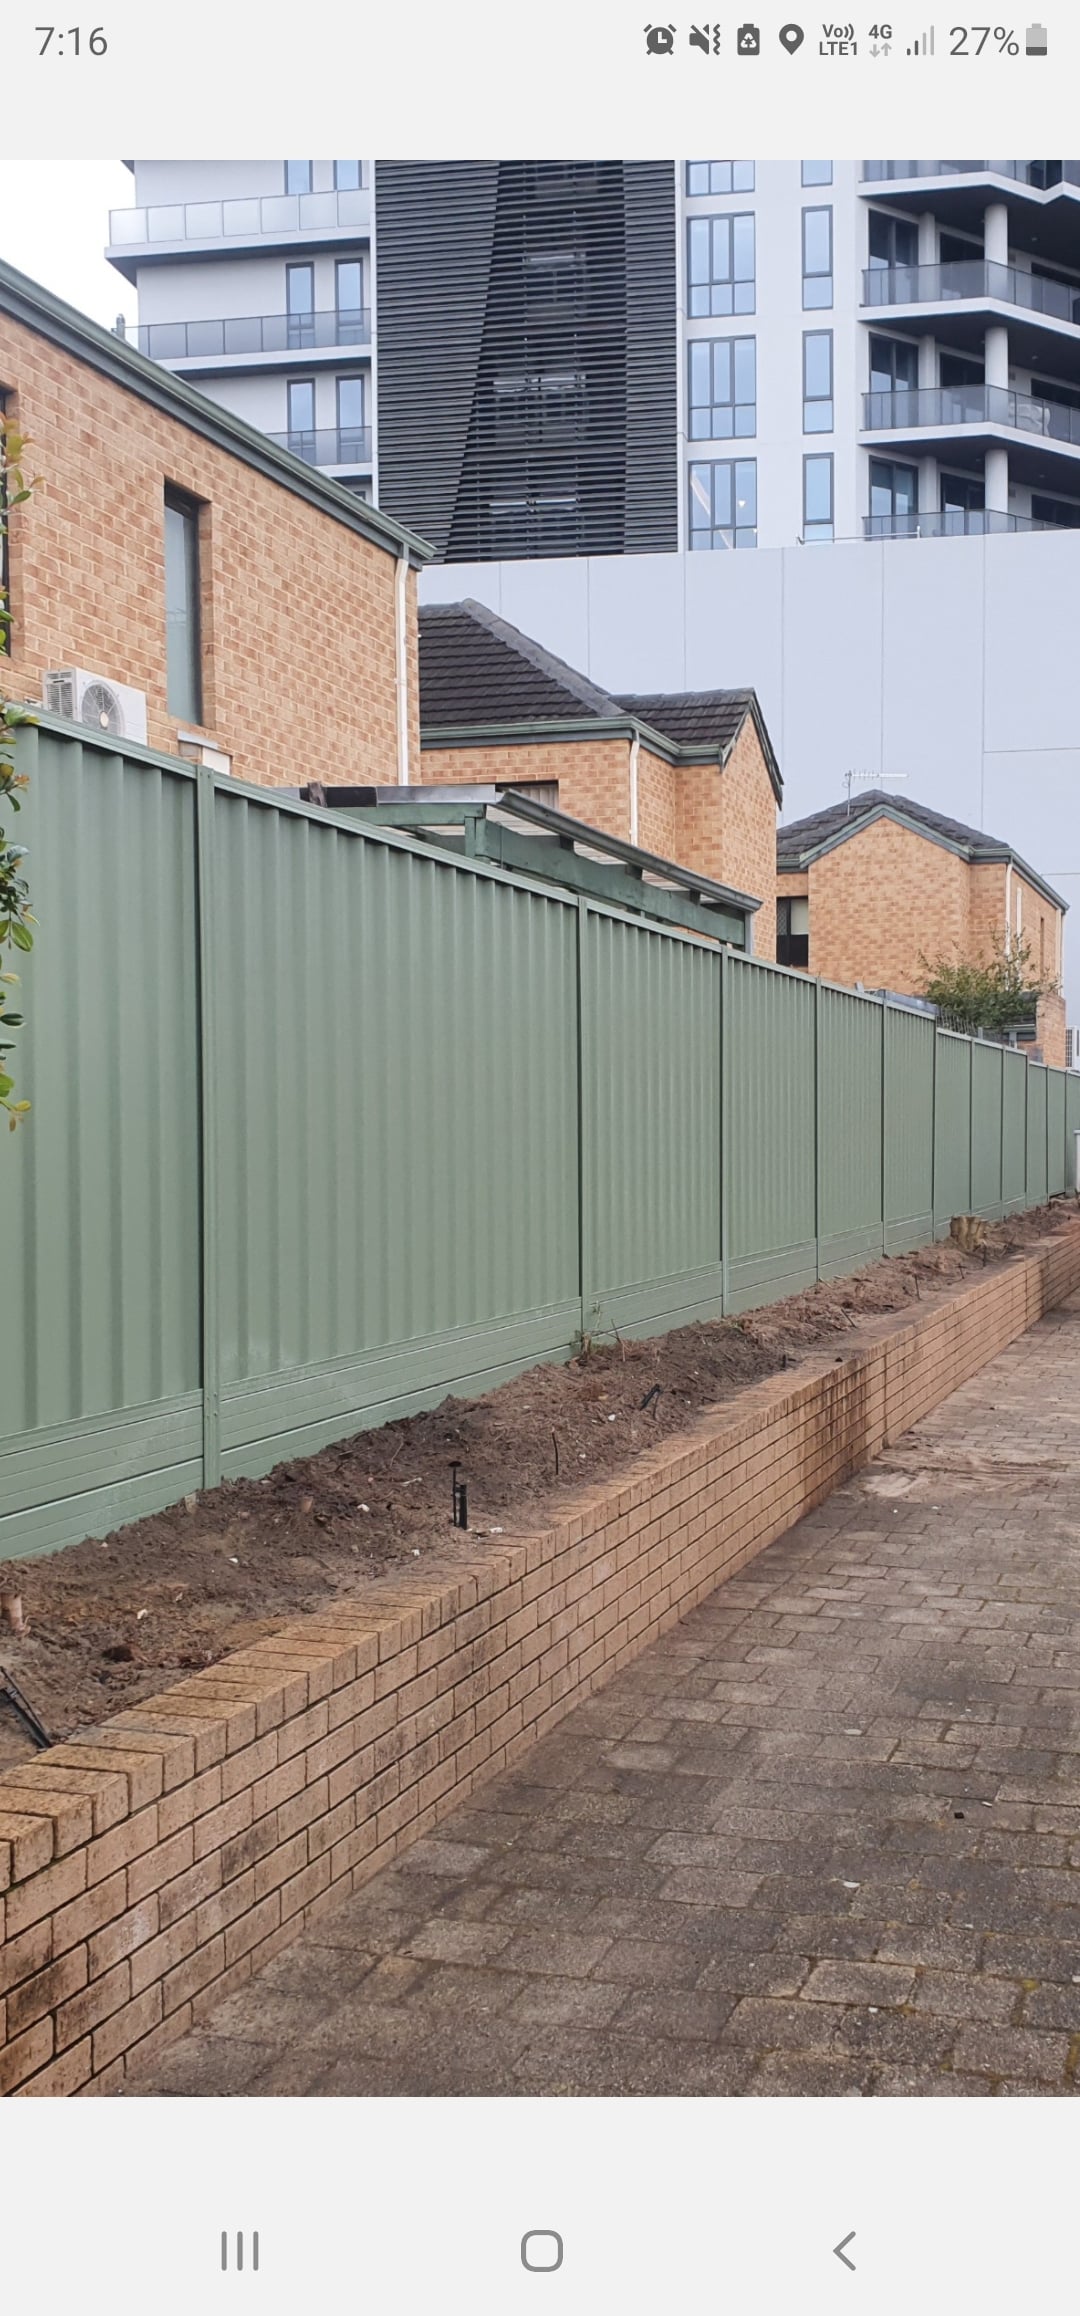 An olive Colorbond fence installed in Perth, featuring sturdy steel panels powder-coated in a rich olive color. The Colorbond fence offers a durable, low maintenance, and stylish solution for defining property boundaries and enhancing security and privacy. The olive color adds a touch of personality to the property and complements the surrounding landscape or house exterior. The fence installation team can customize the design and height of the fence to meet the specific needs and preferences of the property owner, providing a practical and attractive boundary for the property.